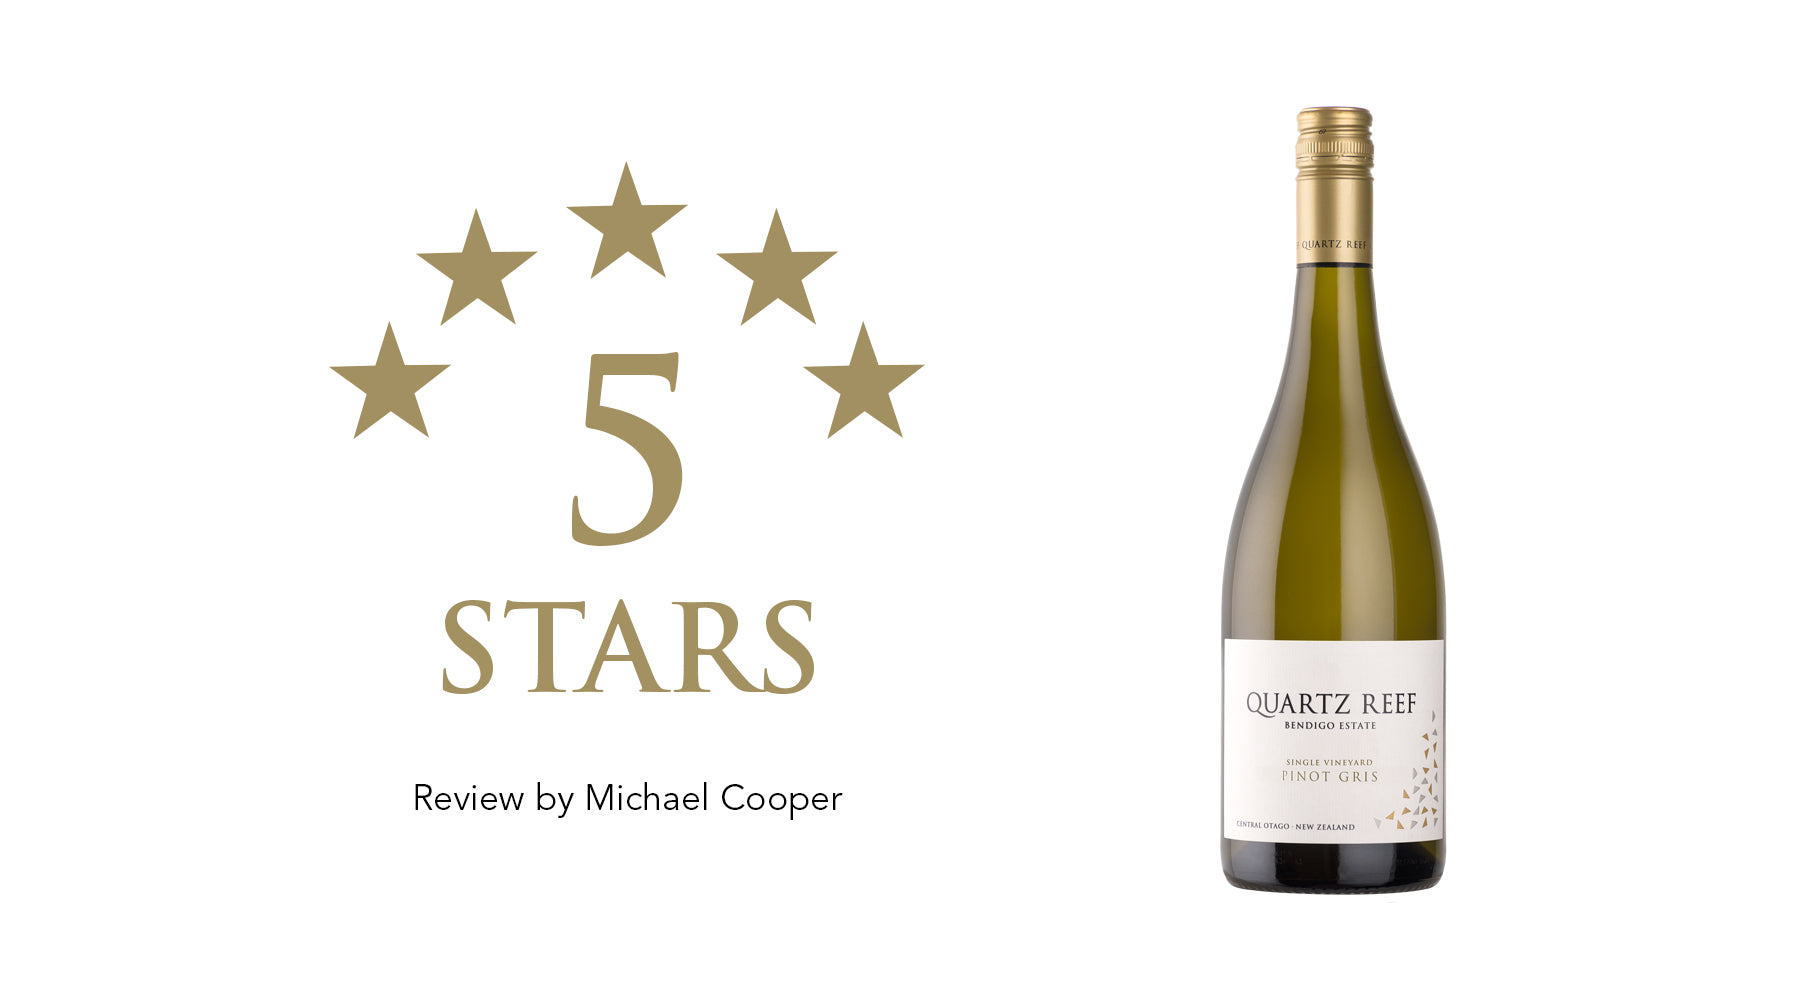 Pinot Gris 2020 - Awarded 5 Stars